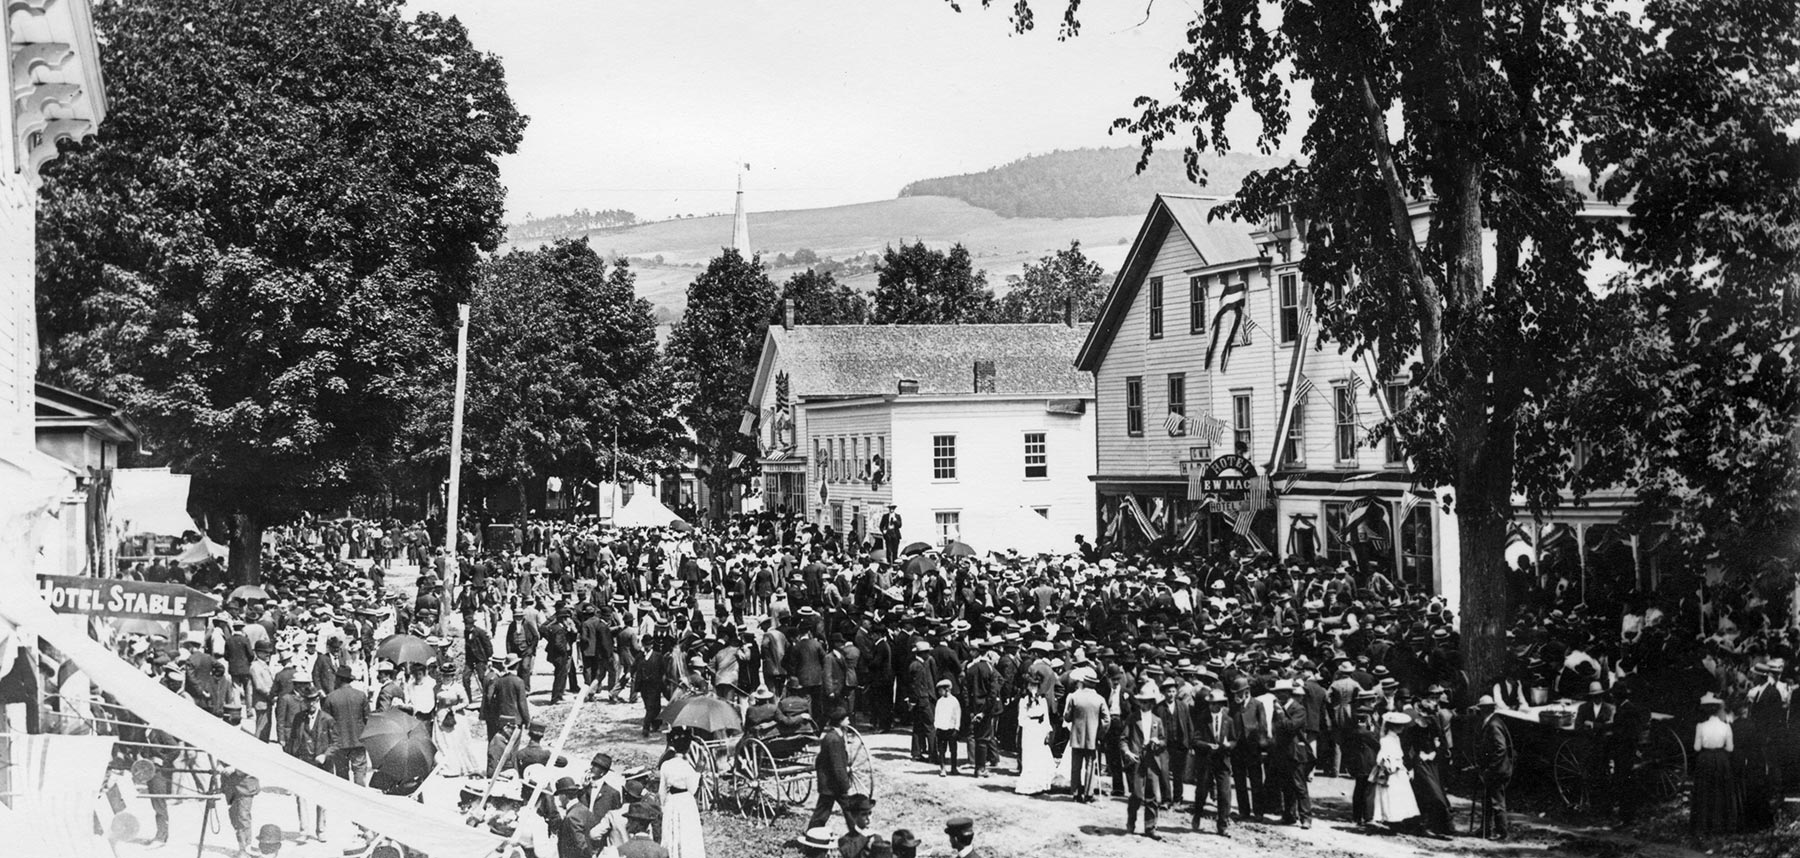 Historical photo of crowd of people on Main Street